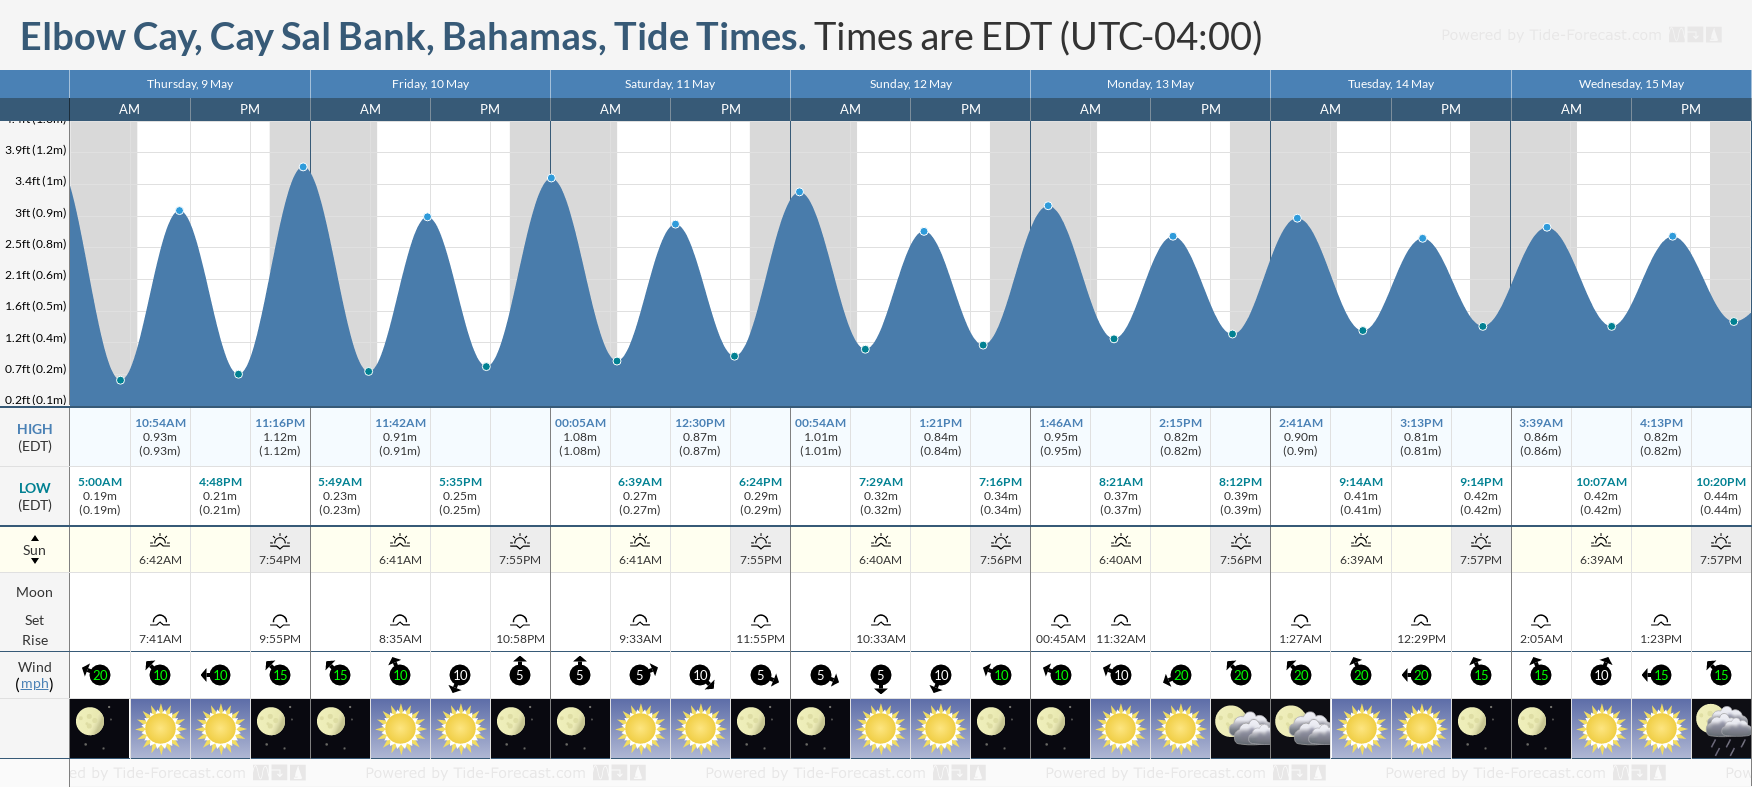 Elbow Cay, Cay Sal Bank, Bahamas Tide Chart including high and low tide tide times for the next 7 days